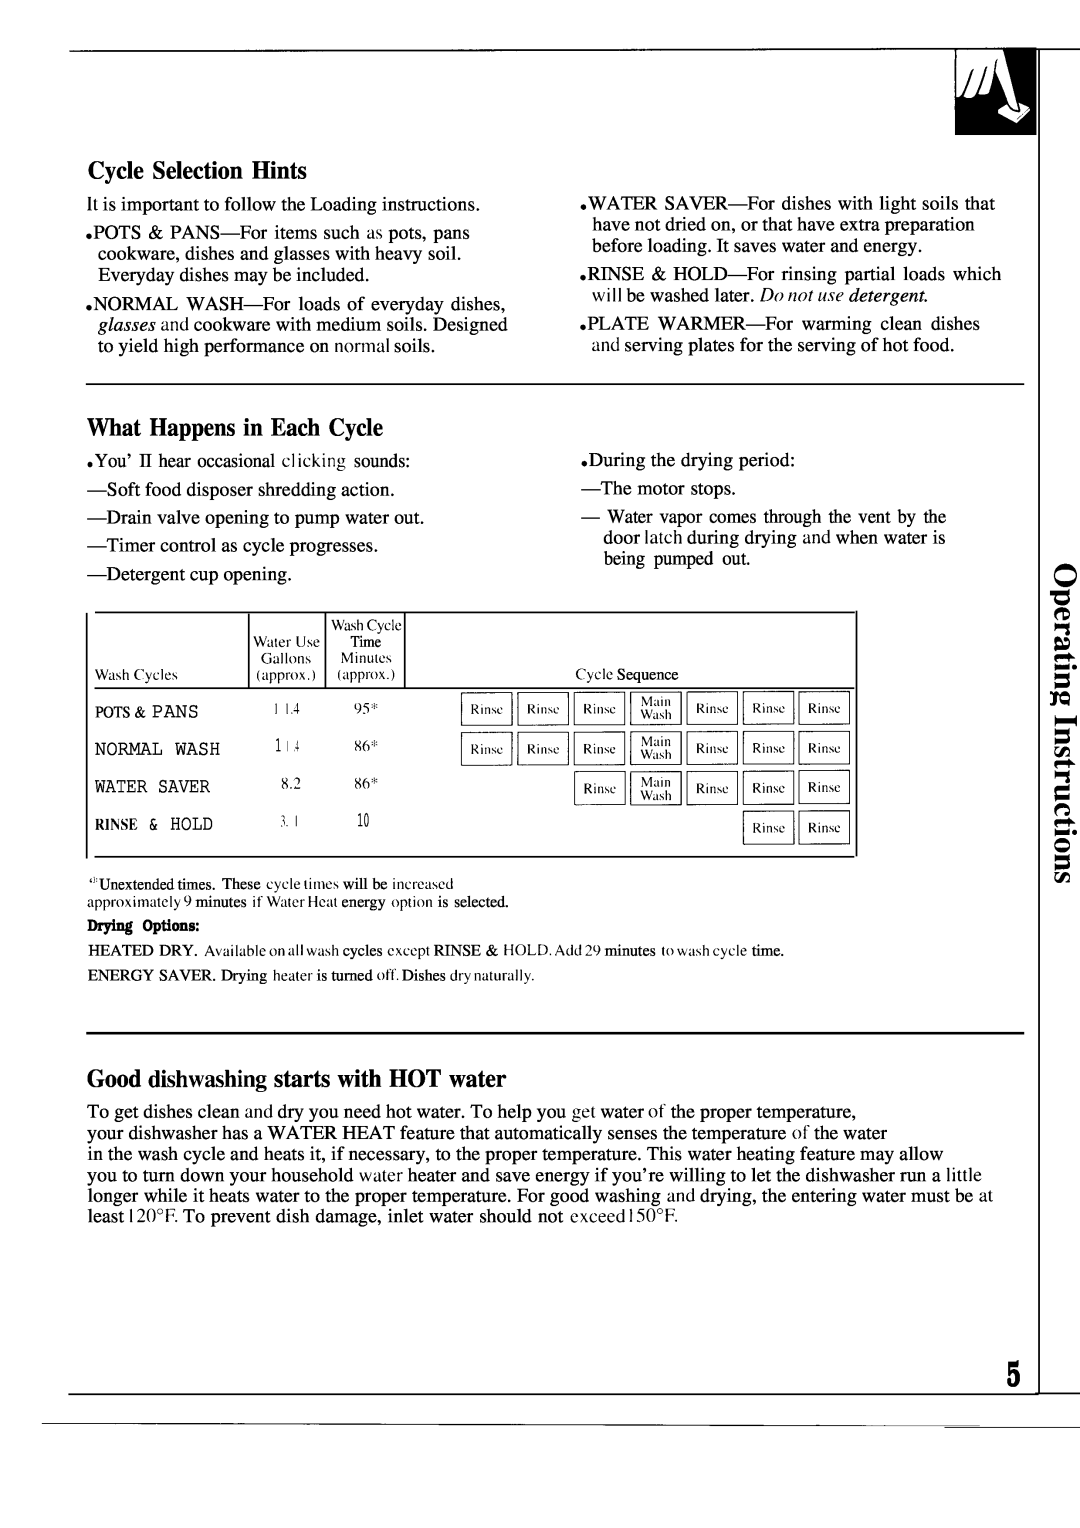 Hotpoint HDA6009 Cycle Selection Hints, What Happens in Each Cycle, Good dishwashing starts with HOT water, mmmmmmm 